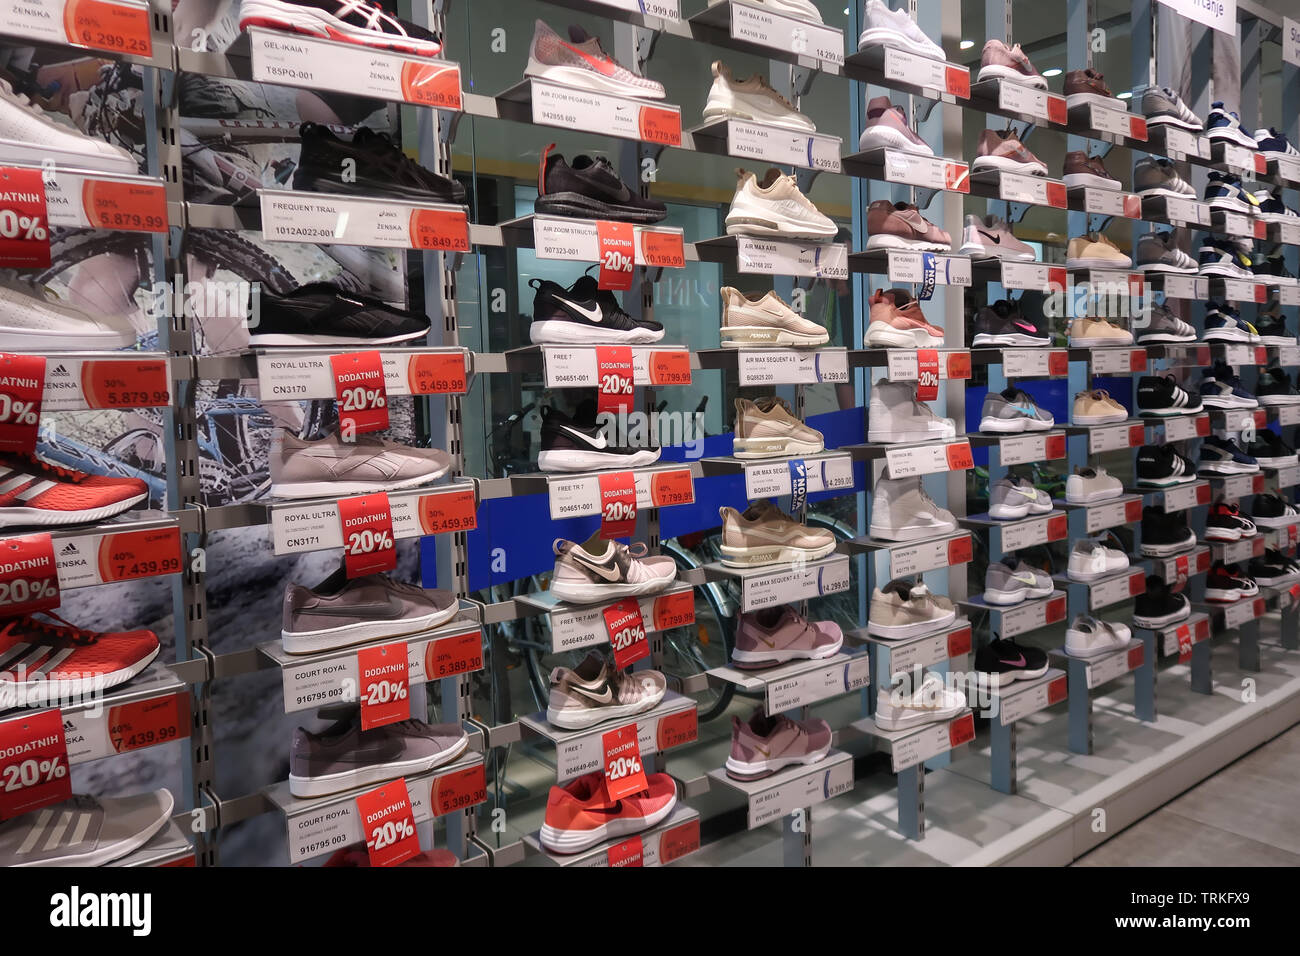 Sneakers in a shopping mall Stock Photo - Alamy